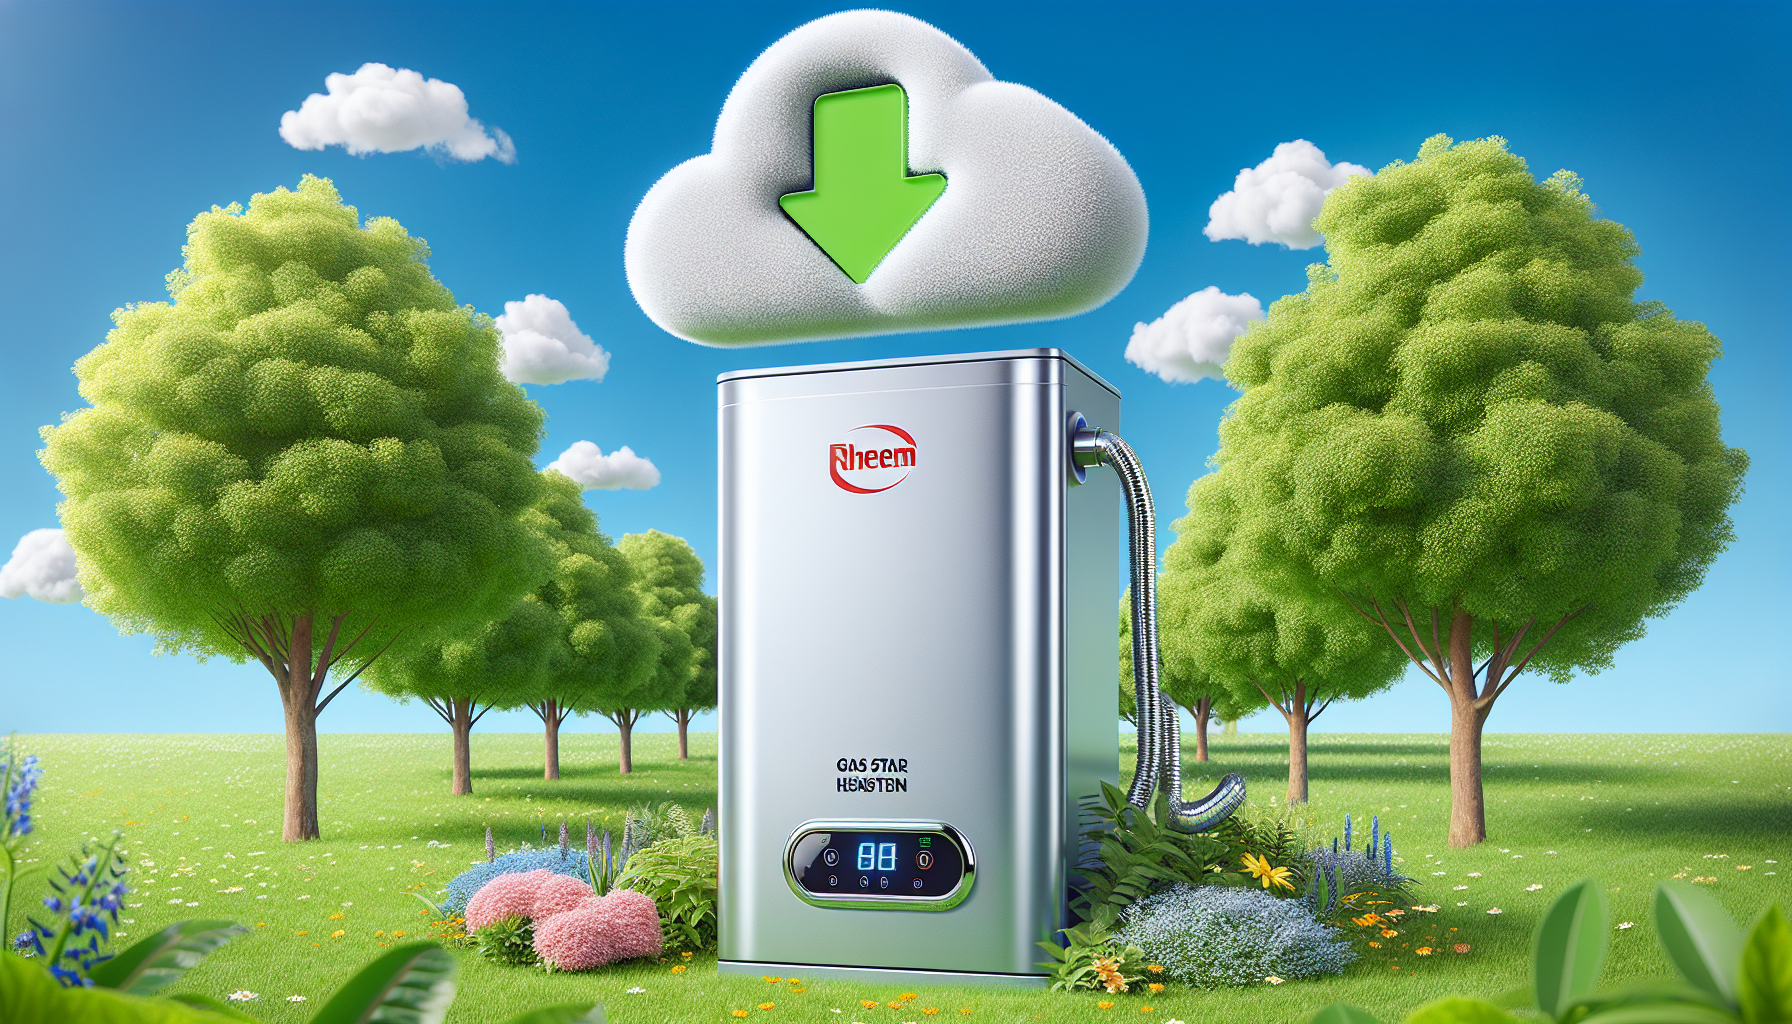 Reducing carbon emissions with energy-efficient gas hot water system